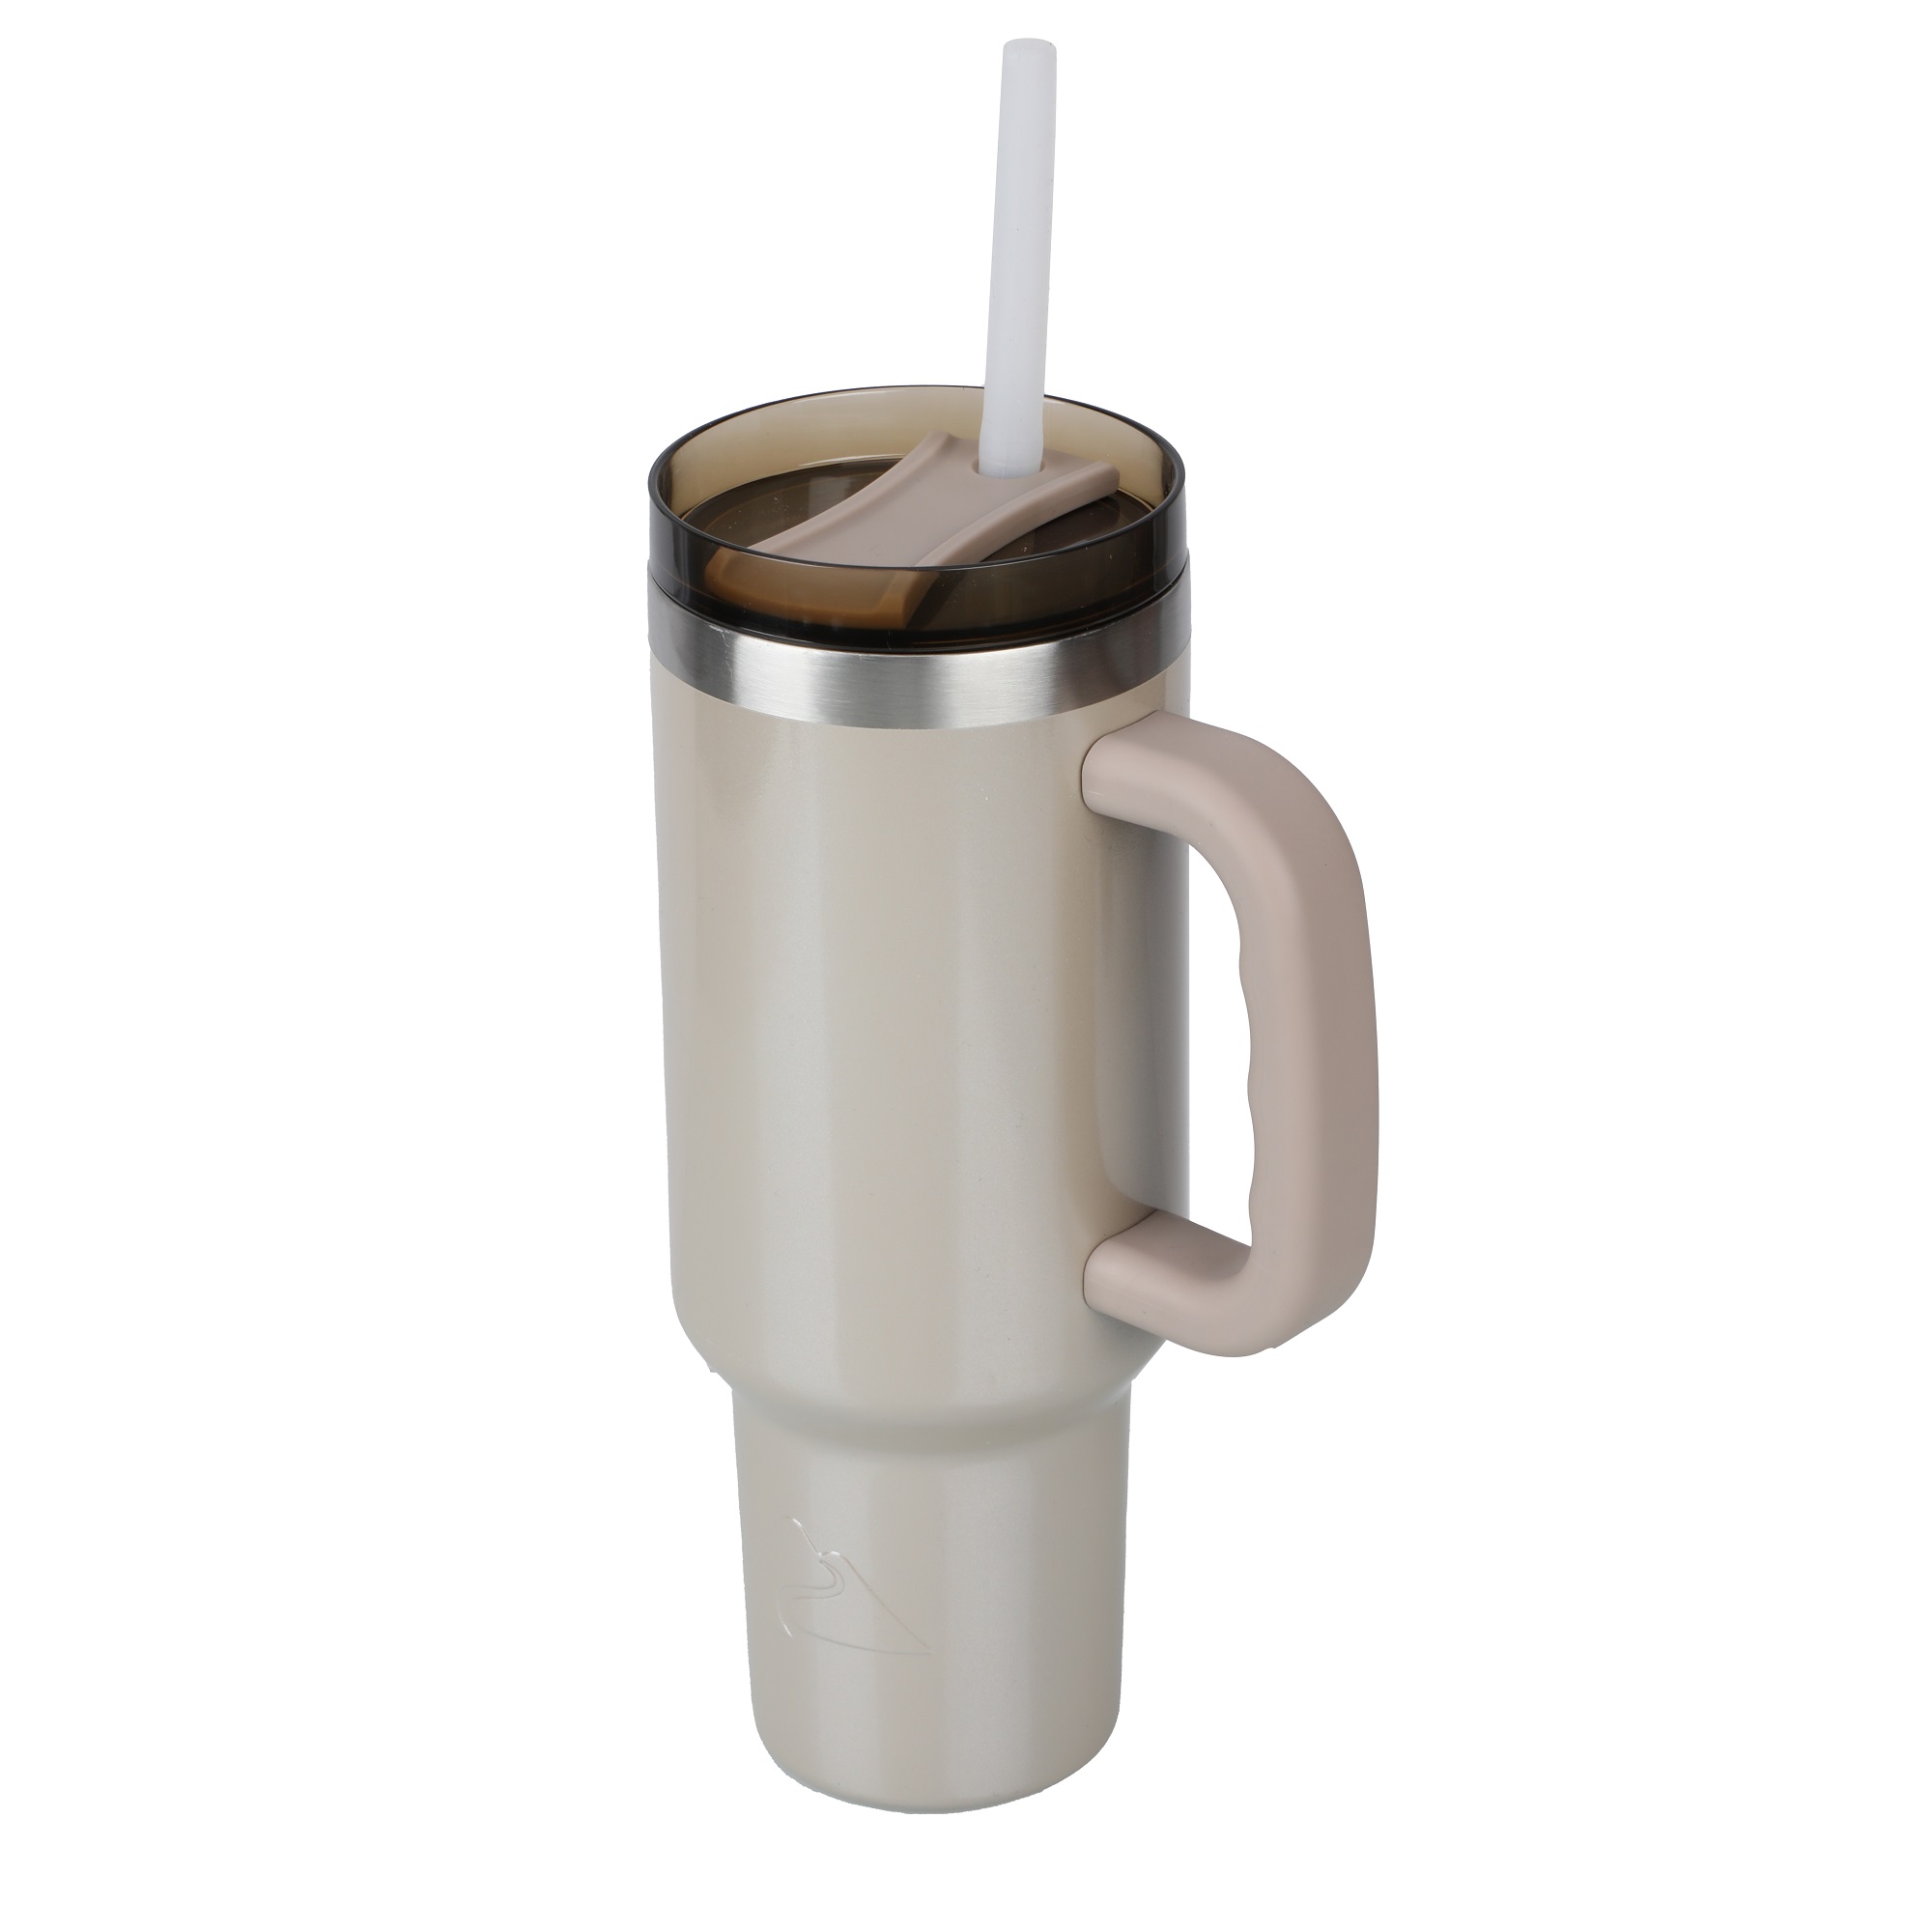 Ozark Trail 40 oz Vacuum Insulated Stainless Steel Tumbler Papyrus Beige - image 4 of 8